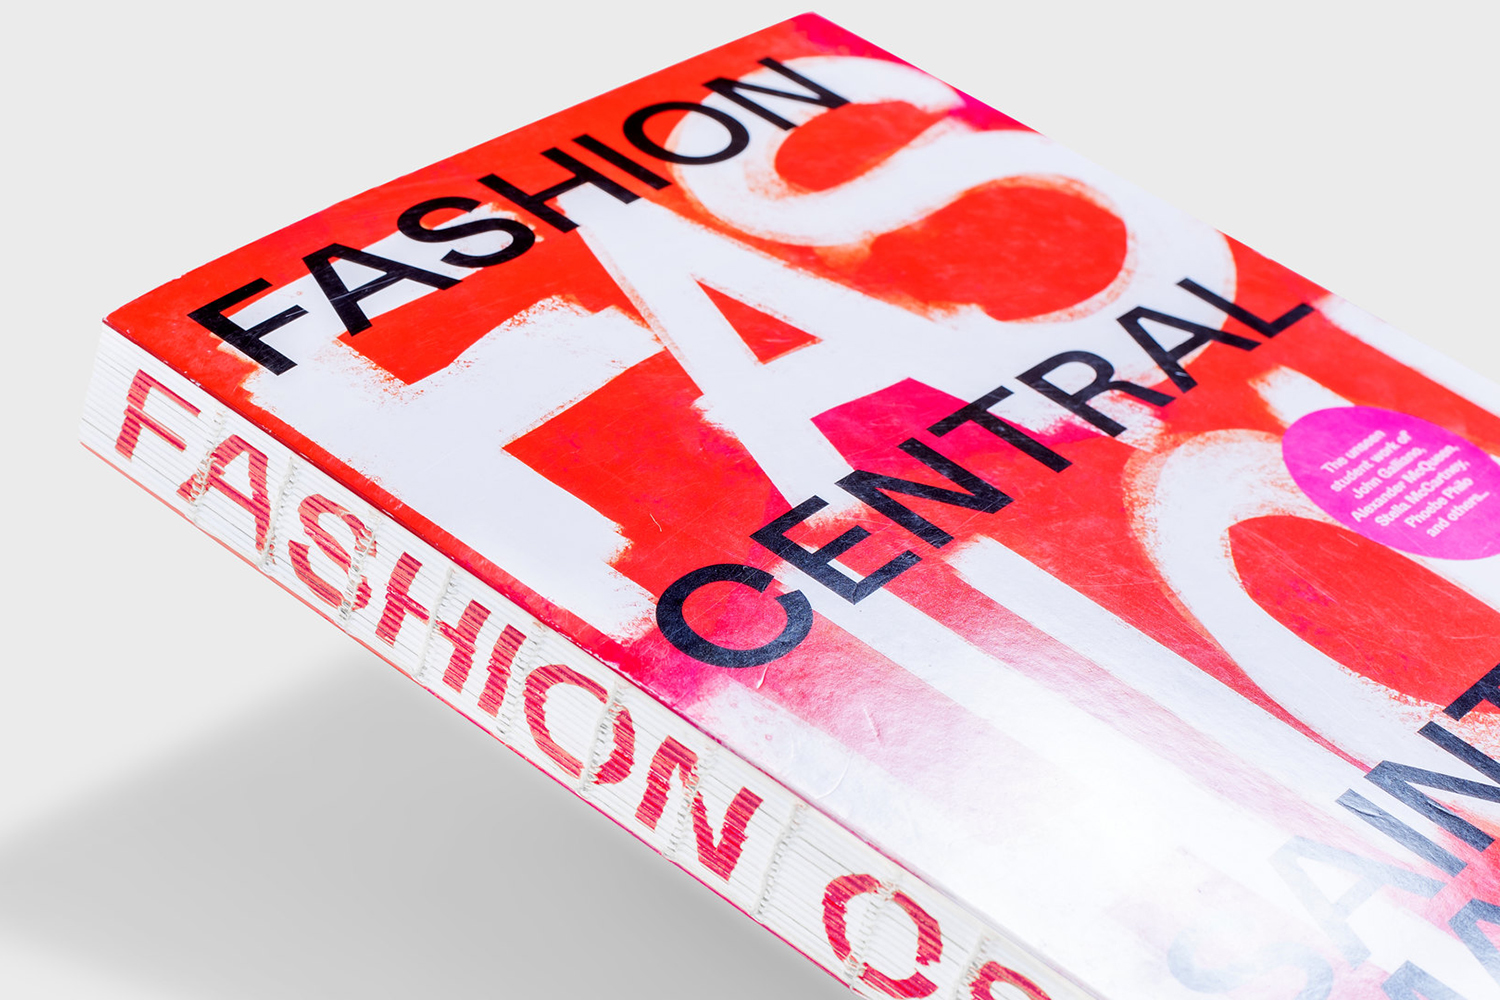 Book designed by Praline exploring the history and impact of the fashion courses at Central Saint Martins